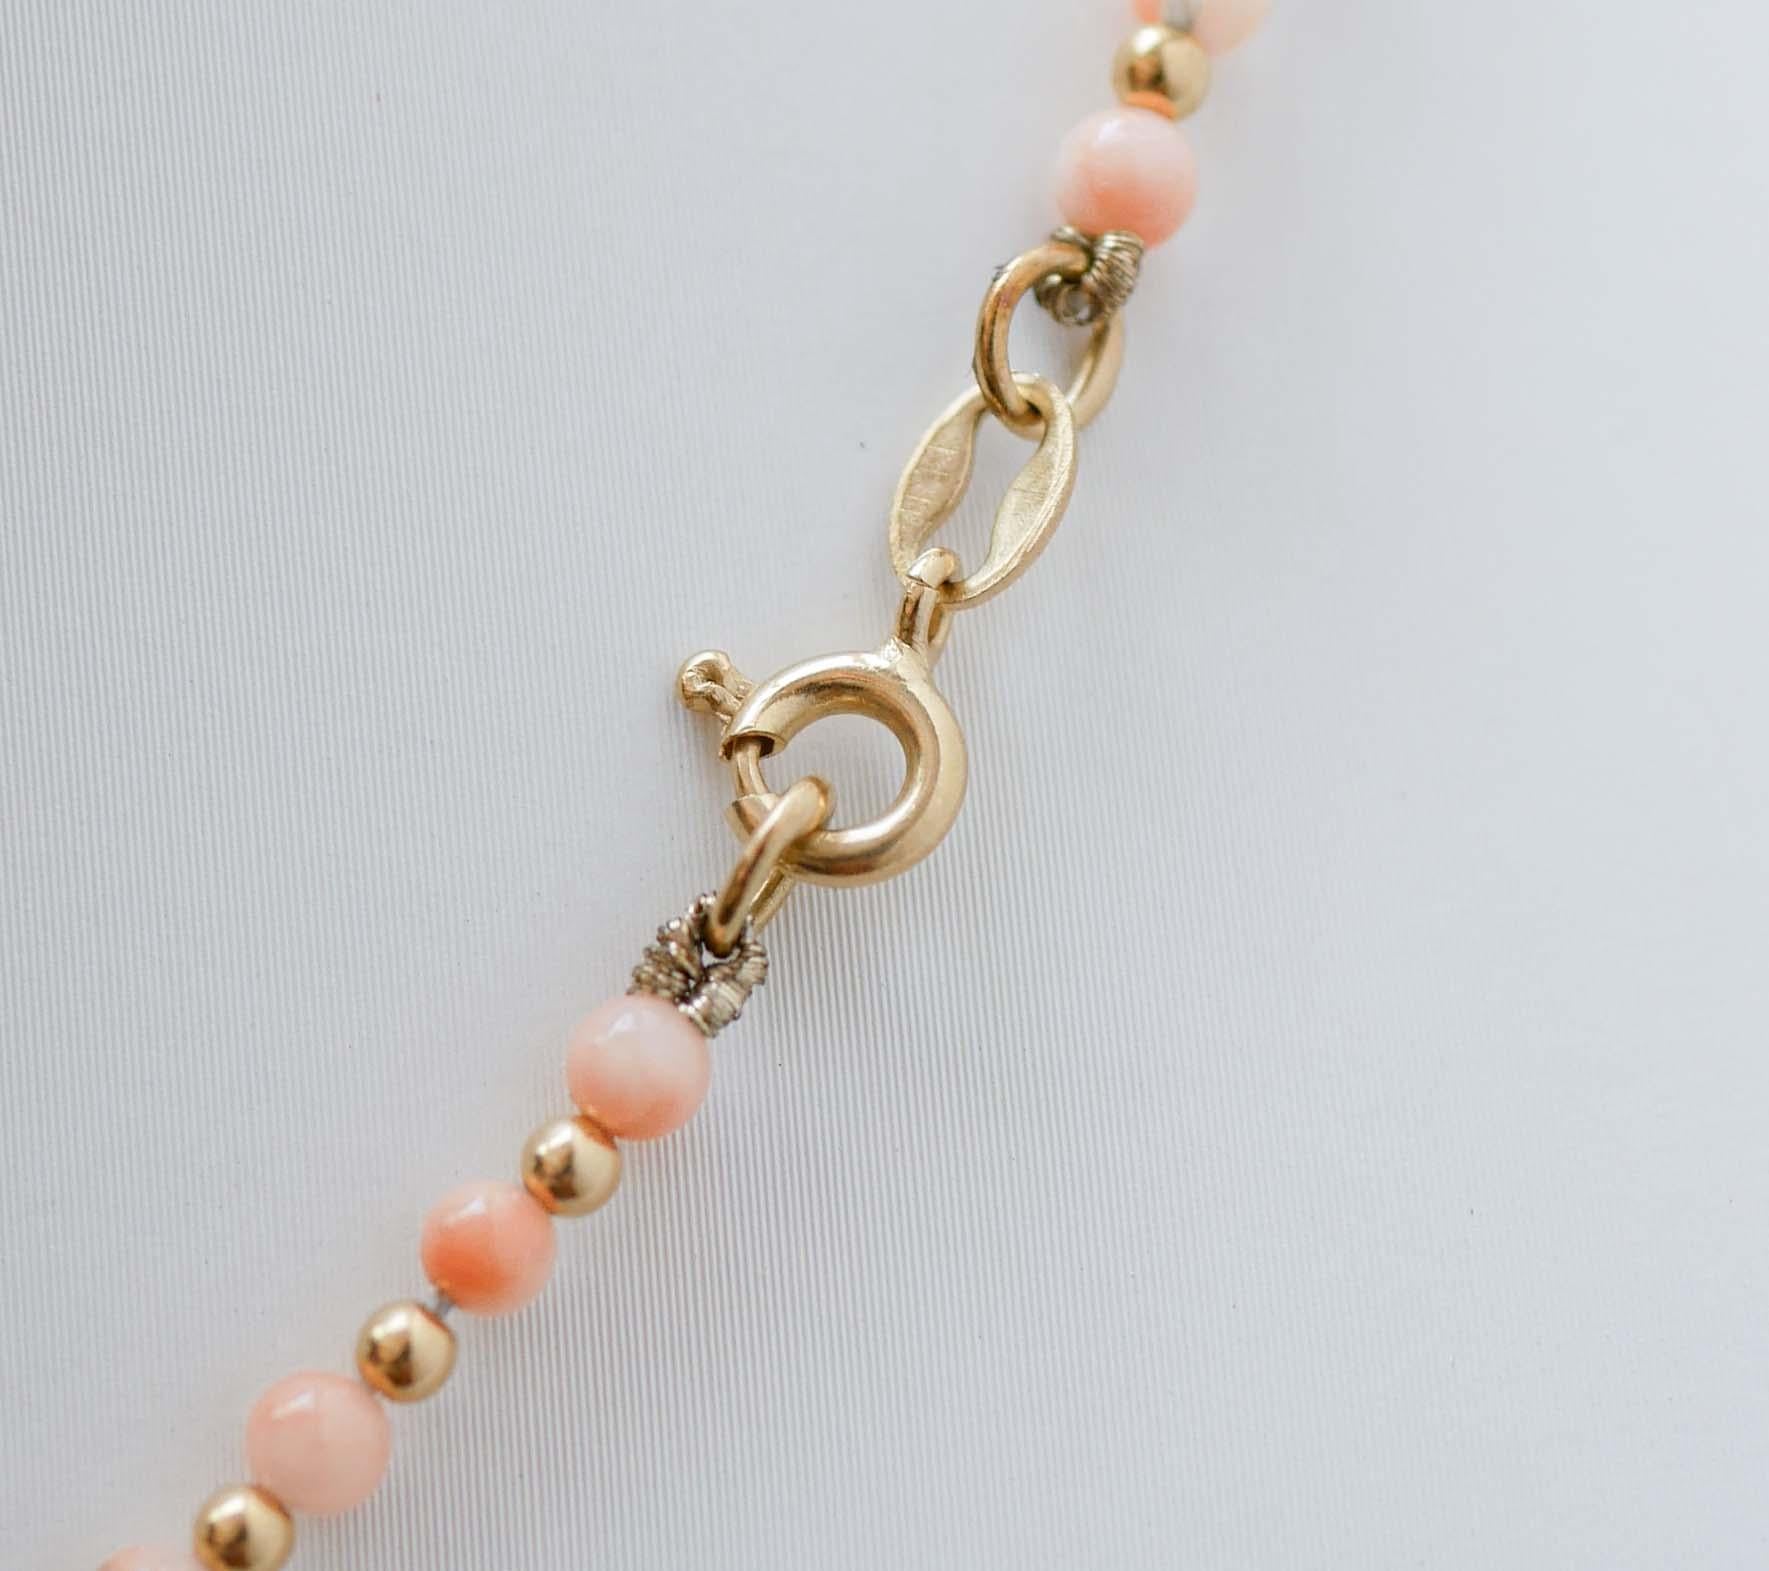 Retro Coral, 18 Karat Yellow Gold Necklace. For Sale